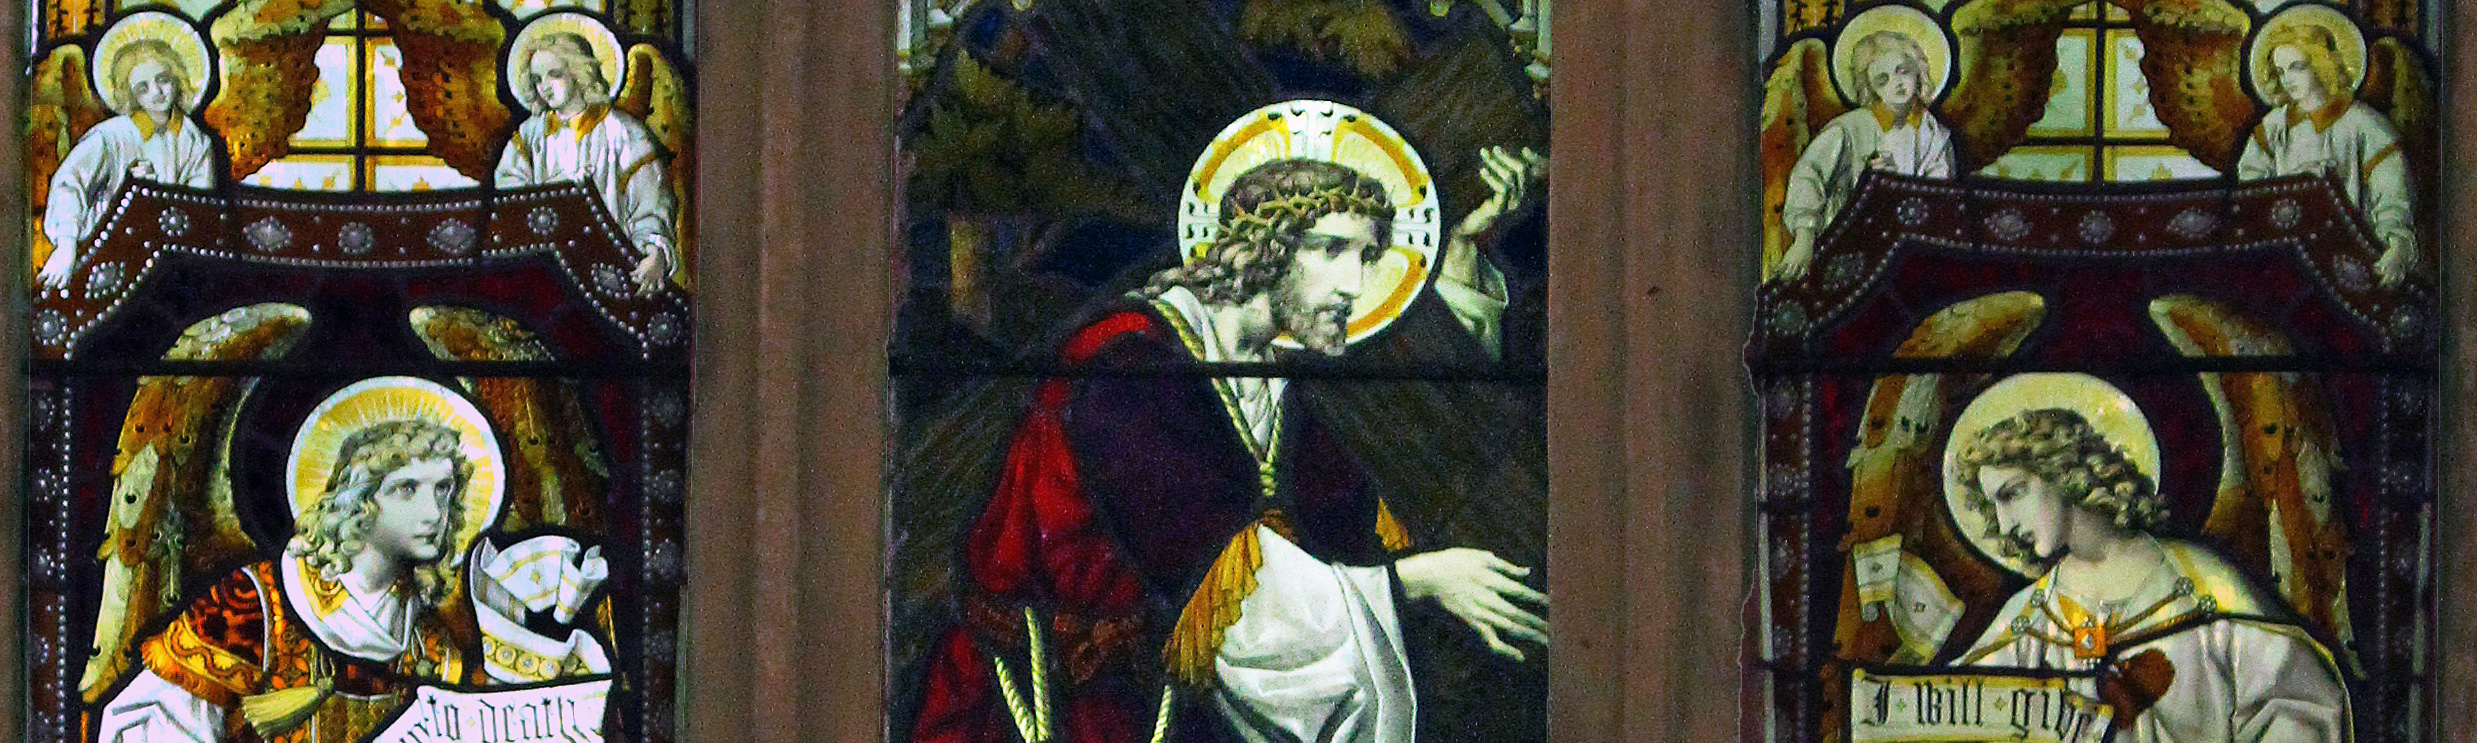 15th century Norwich School stained glass